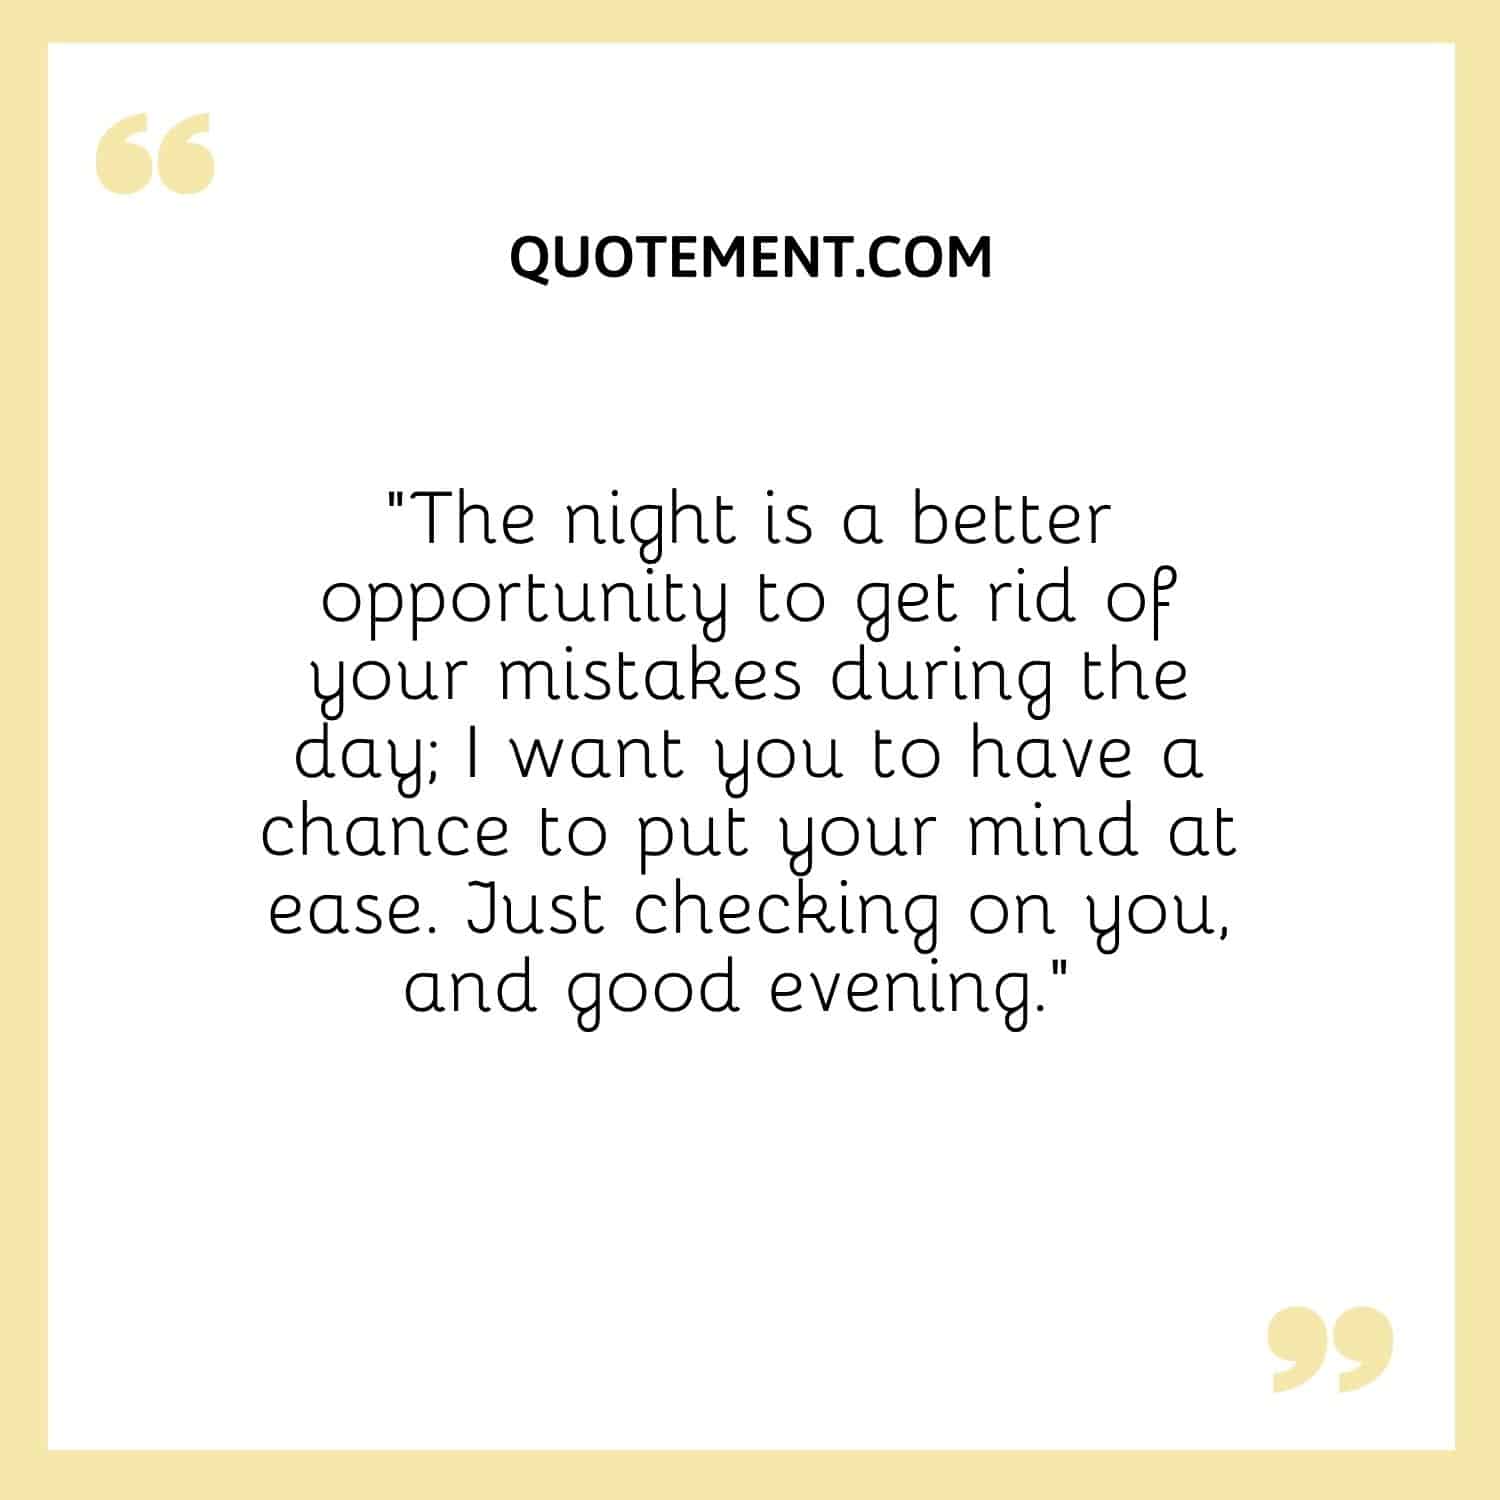 The night is a better opportunity to get rid of your mistakes during the day